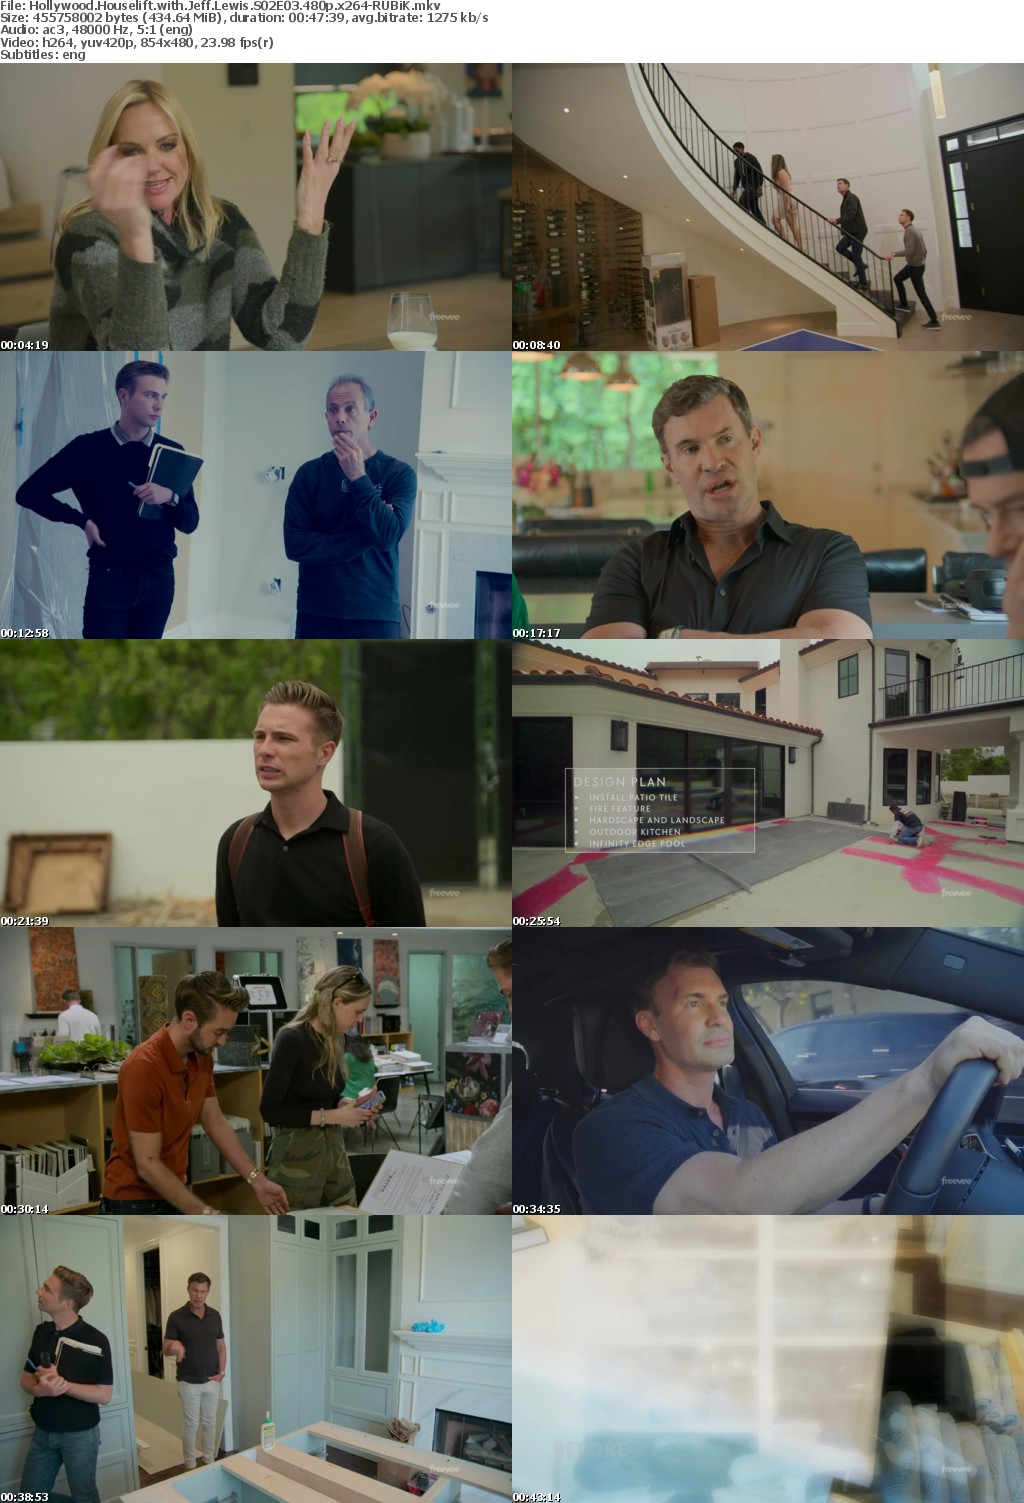 Hollywood Houselift with Jeff Lewis S02E03 480p x264-RUBiK